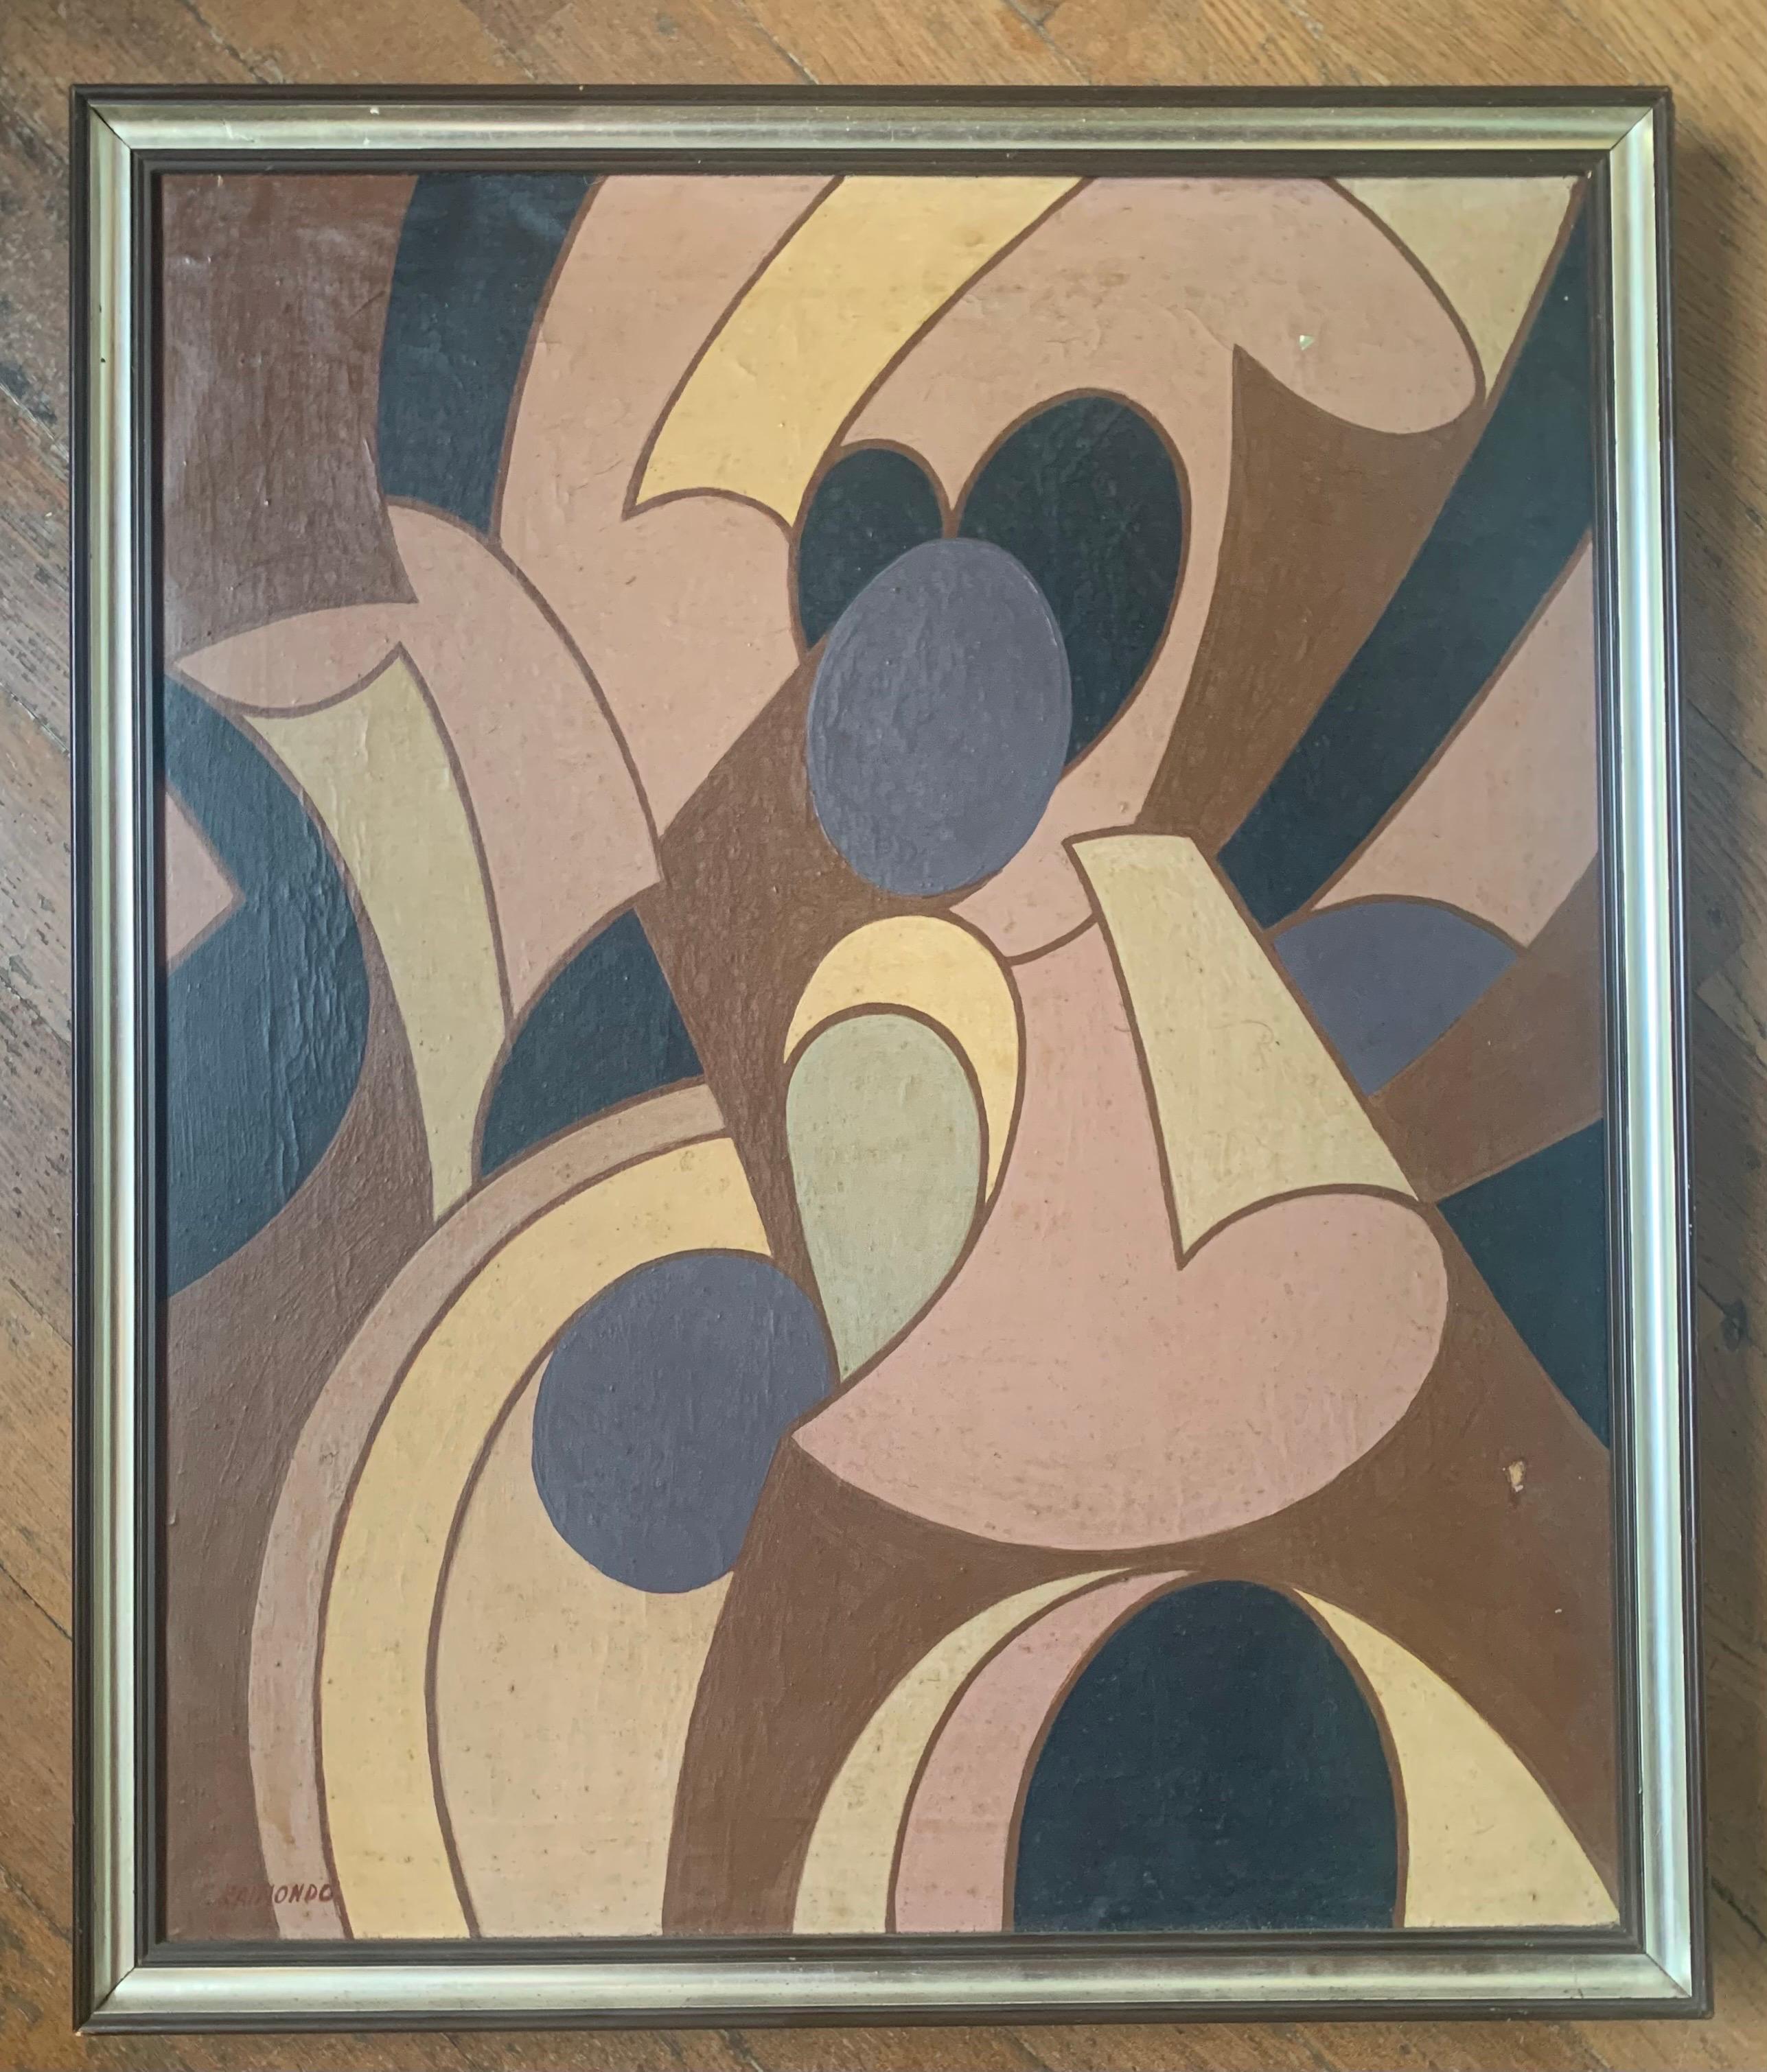 Abstract Painting With Rolled painter's Canvases. 1970.  Signed F. Raimondo in vendita 1